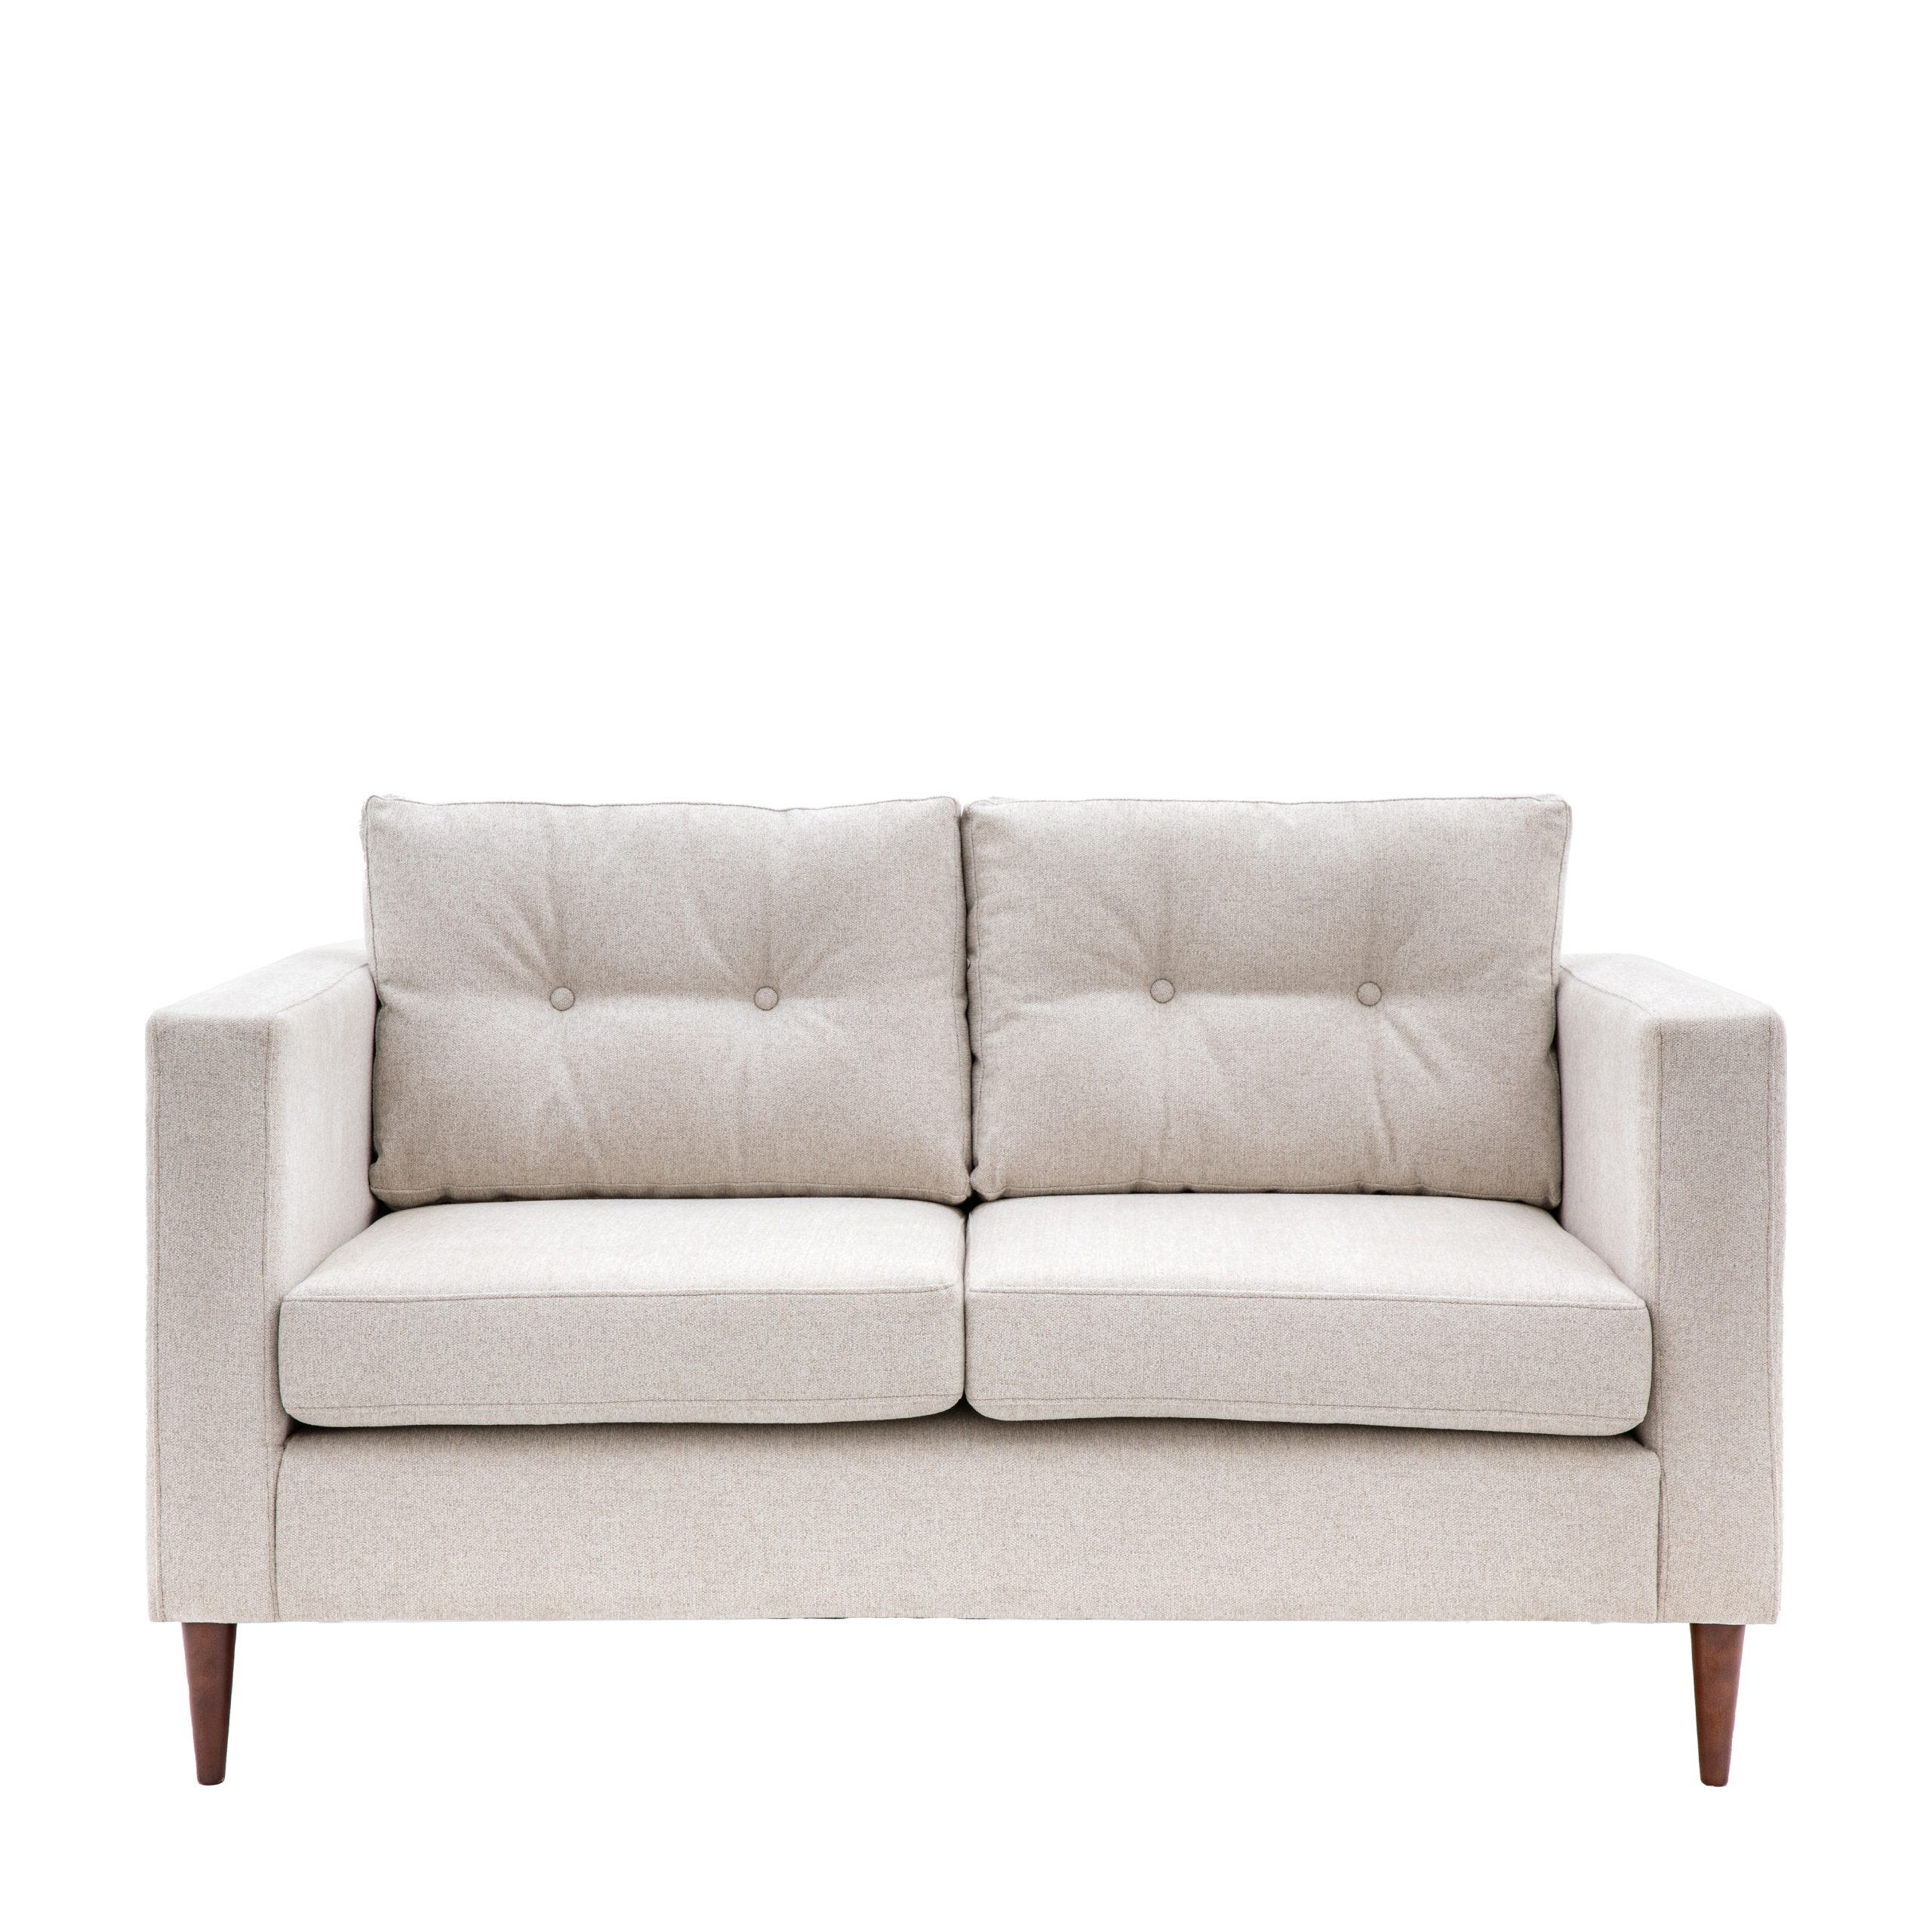 Gallery Direct Whitwell Sofa 2 Seater Light Grey | Shackletons